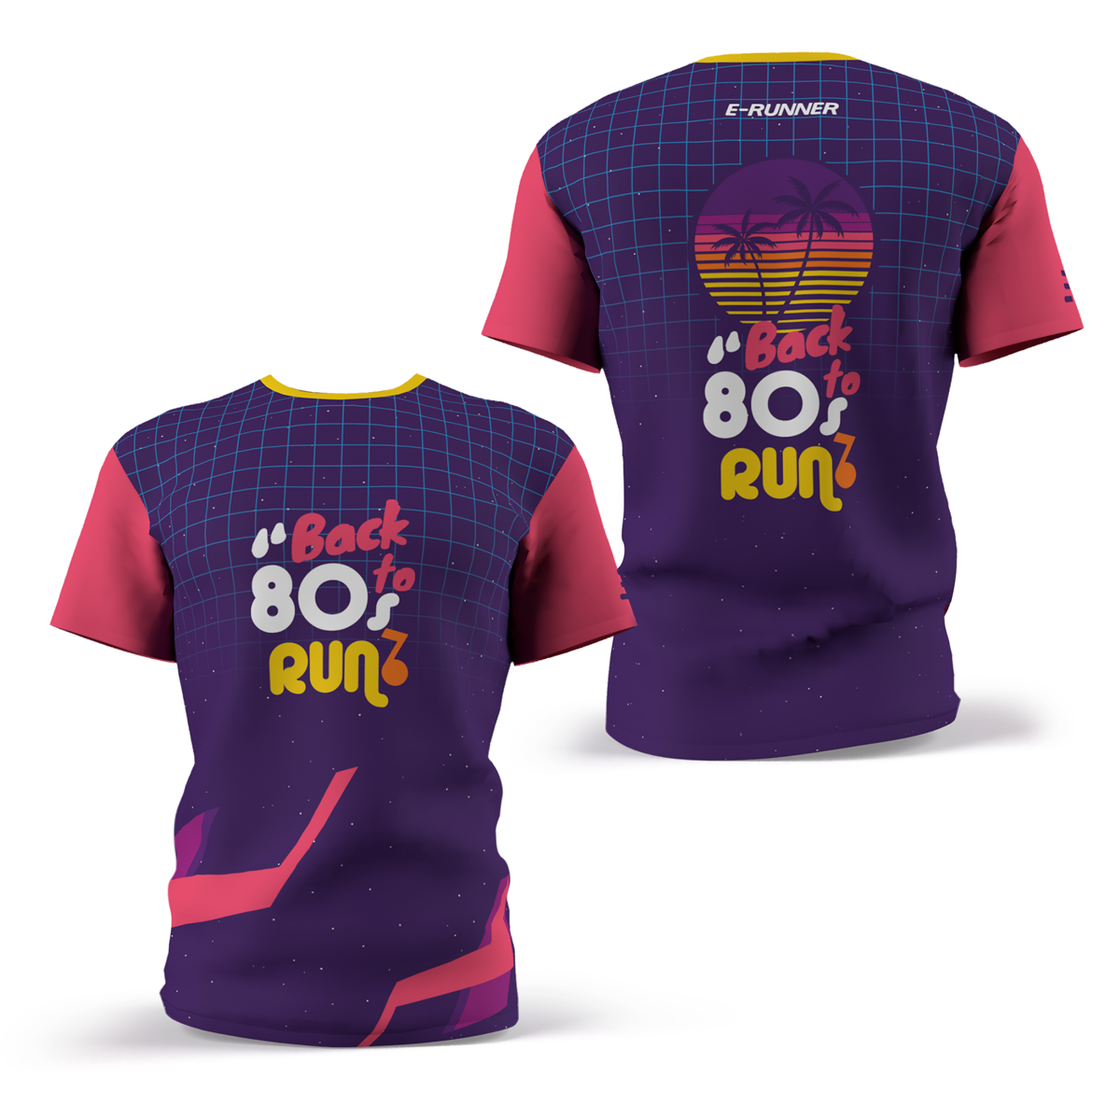 SPECIAL OFFER: Stunning Medal + Official T-Shirt | Back to 80's Run